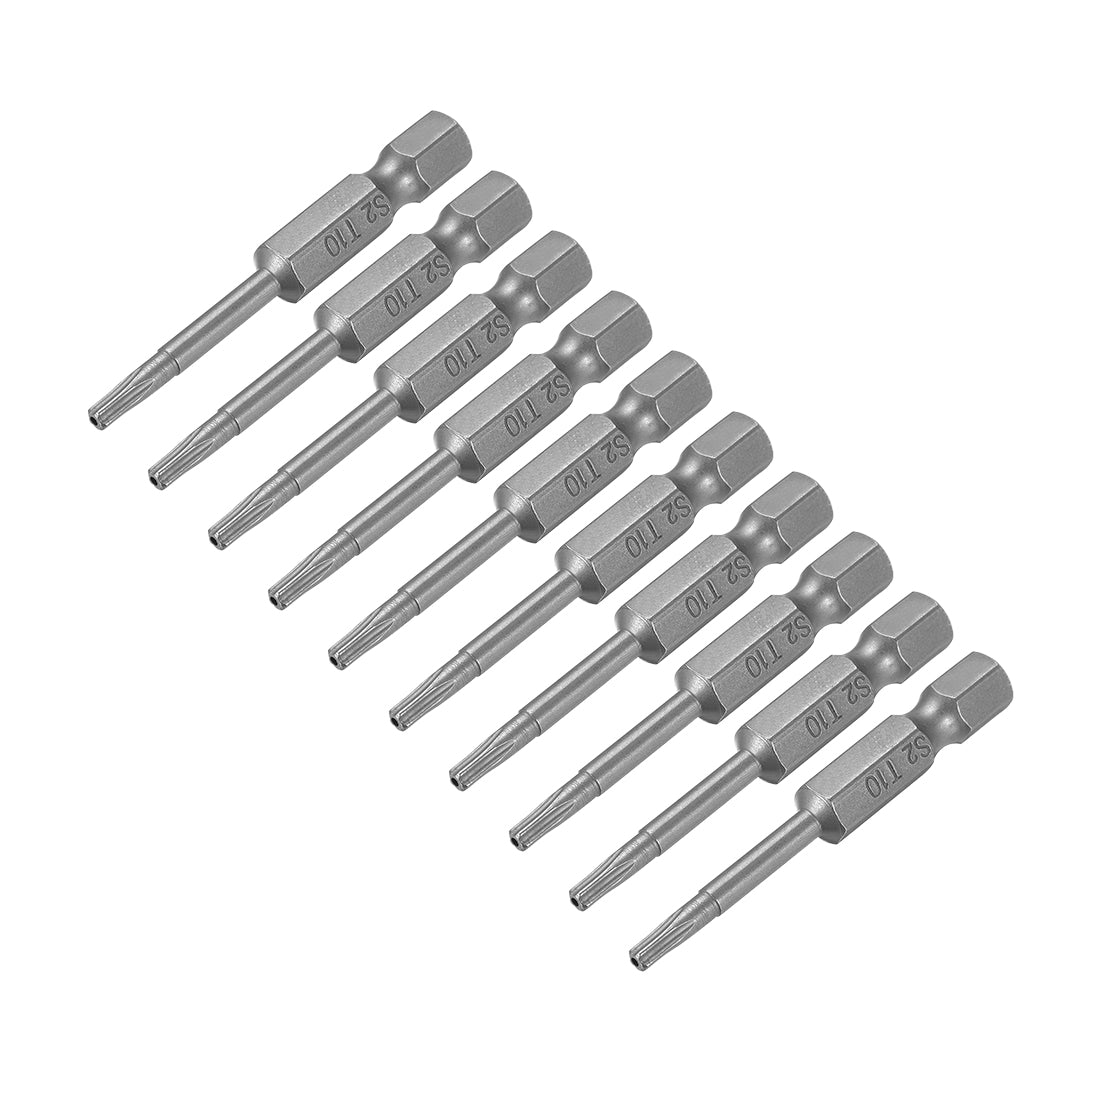 uxcell Uxcell 50mm Long 1/4inch Hex Shank T10 Torx Security Star Screwdriver Bits S2 High Alloy Steel 10pcs